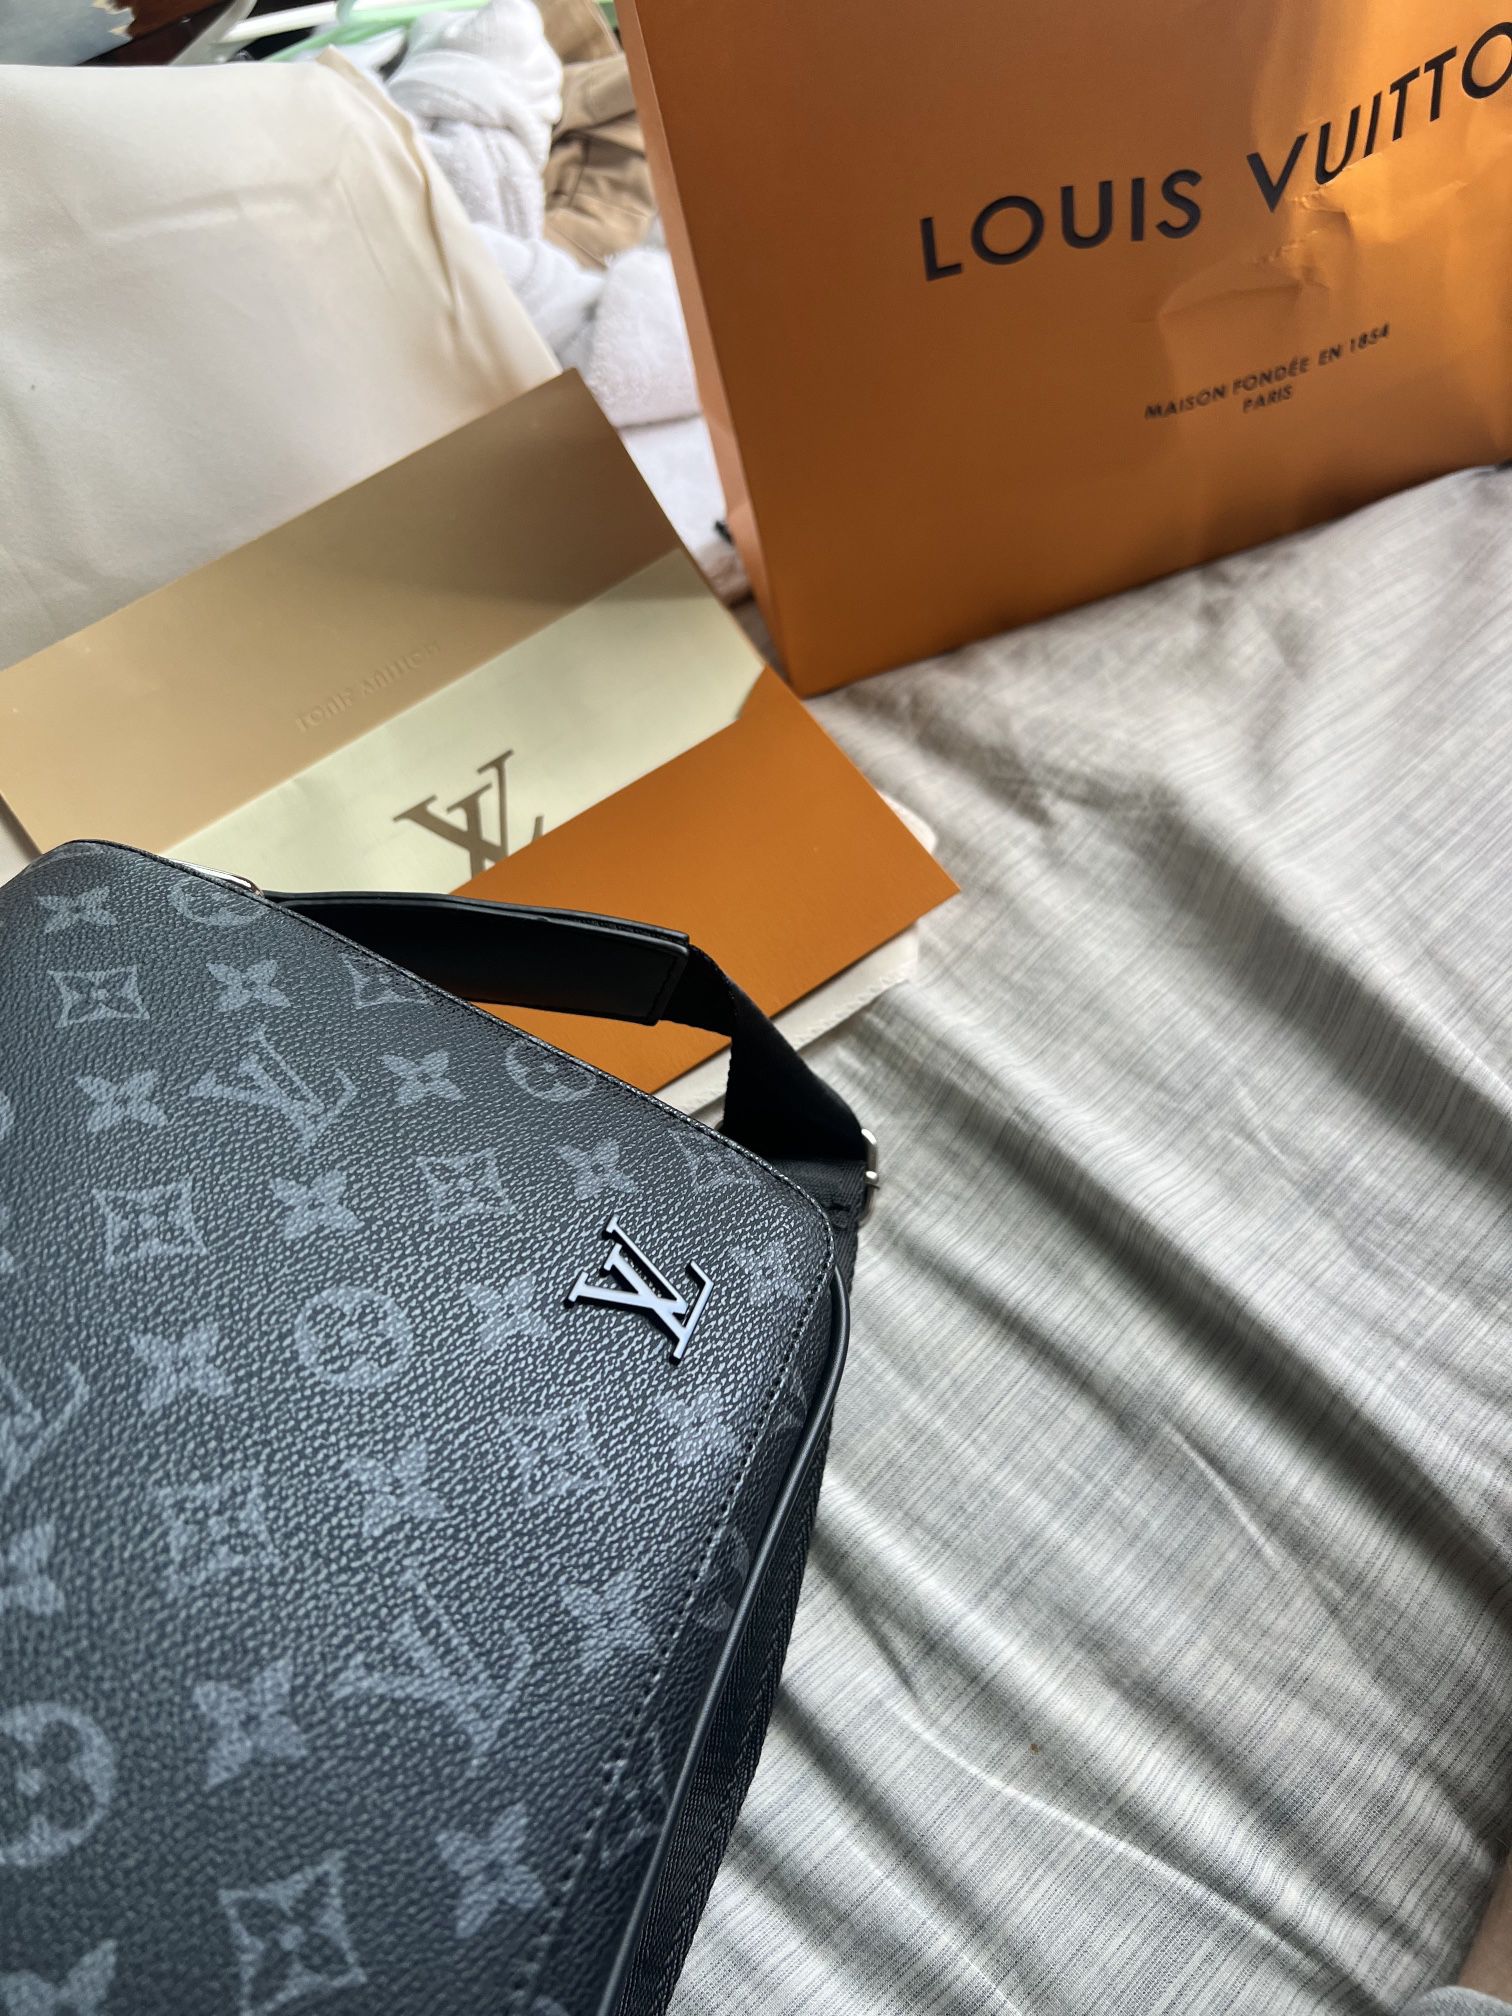 BRAND NEW AUTHENTIC LV LOUIS VUITTON VACHETTA LEATHER CROSSBODY STRAP RED  for Sale in New York, NY - OfferUp